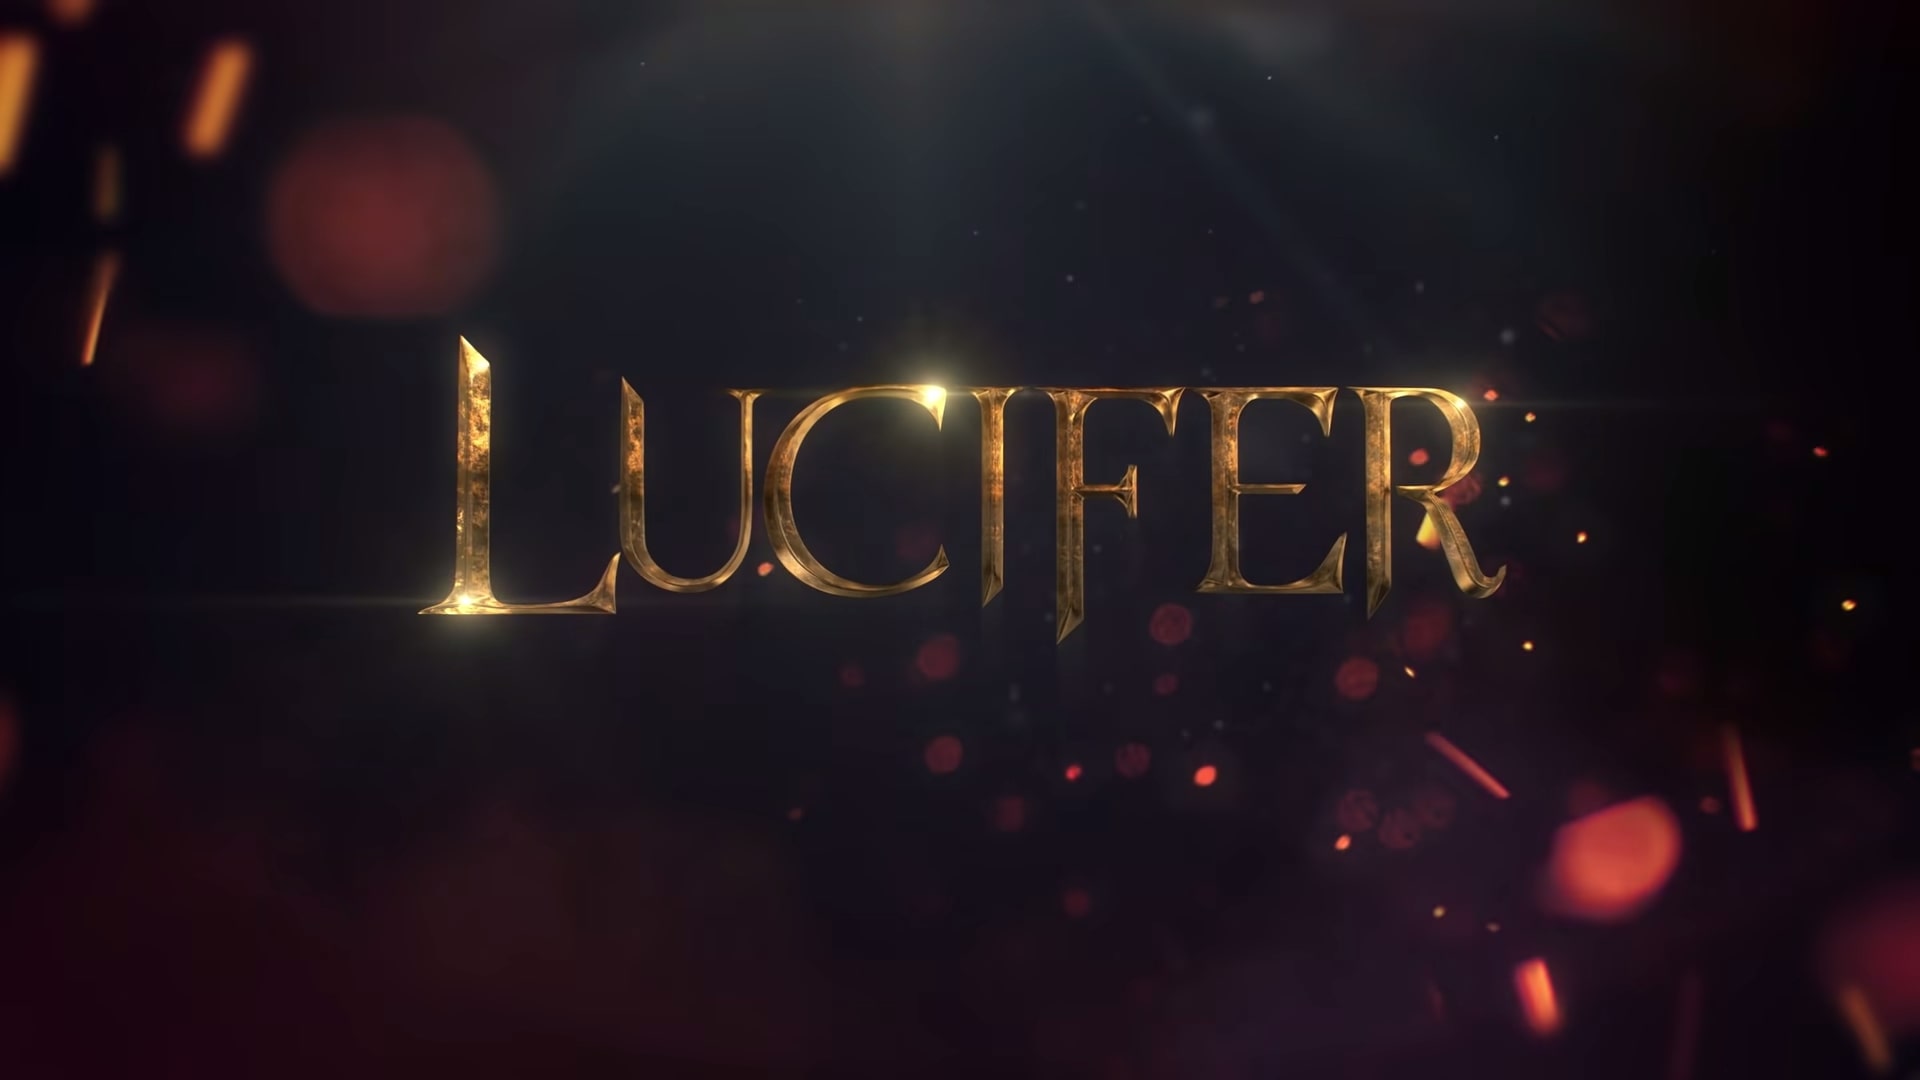 Lucifer Season 5 Part 2 Netflix Trailer, Coming to Netflix in May 2021